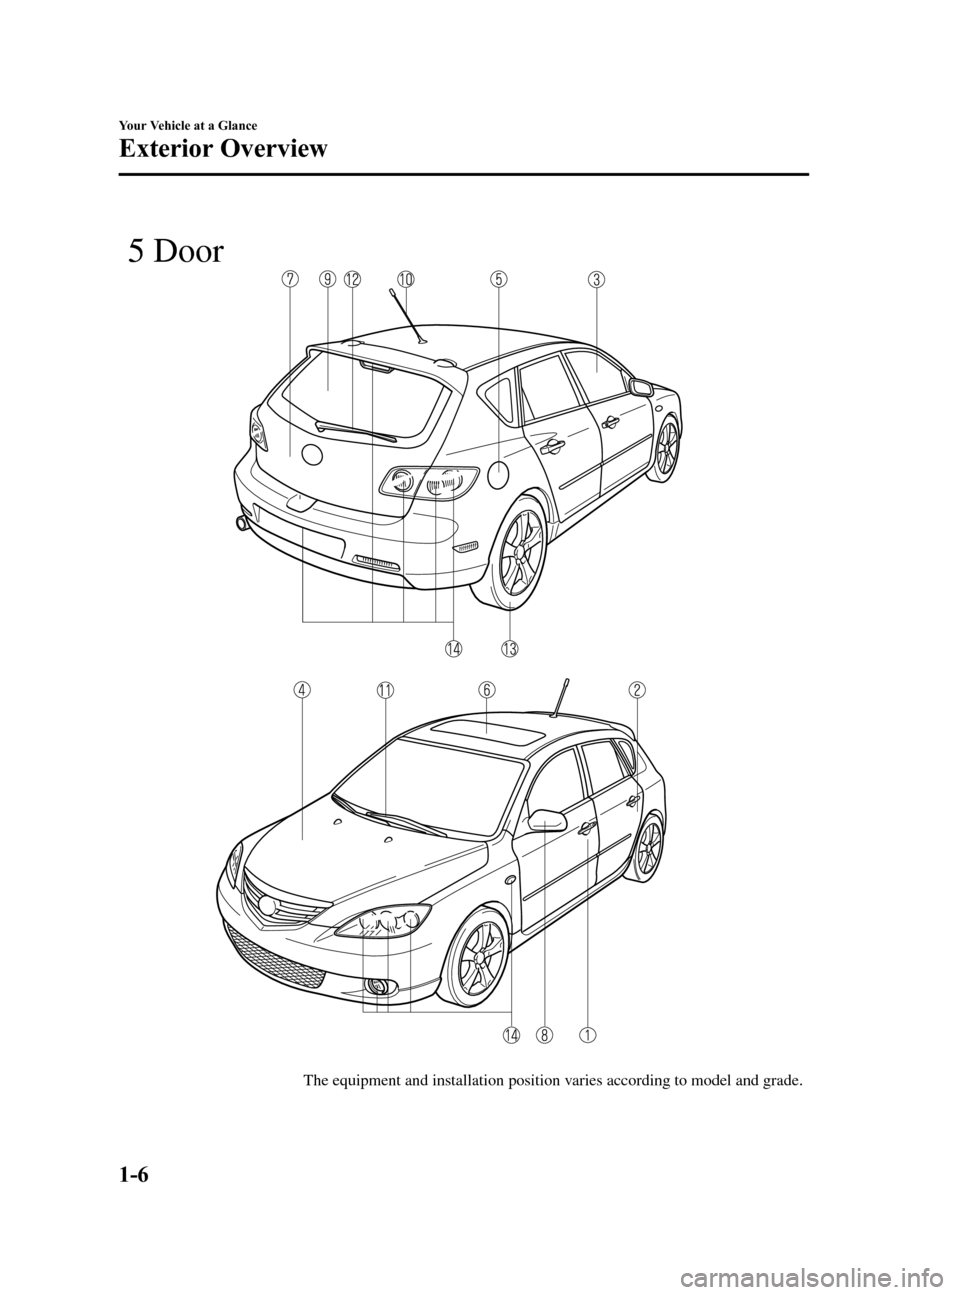 MAZDA MODEL 3 HATCHBACK 2005   (in English) User Guide Black plate (12,1)
The equipment and installation position varies according to model and grade.
 5 Door
1-6
Your Vehicle at a Glance
Exterior Overview
Mazda3_8T97-EC-04J_Edition1 Page12
Saturday, Sept